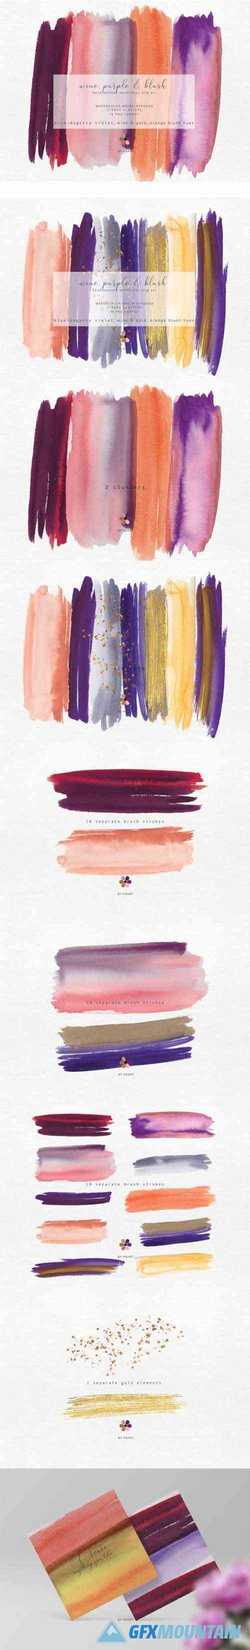 Hand Painted Watercolor Brush Strokes 1743290